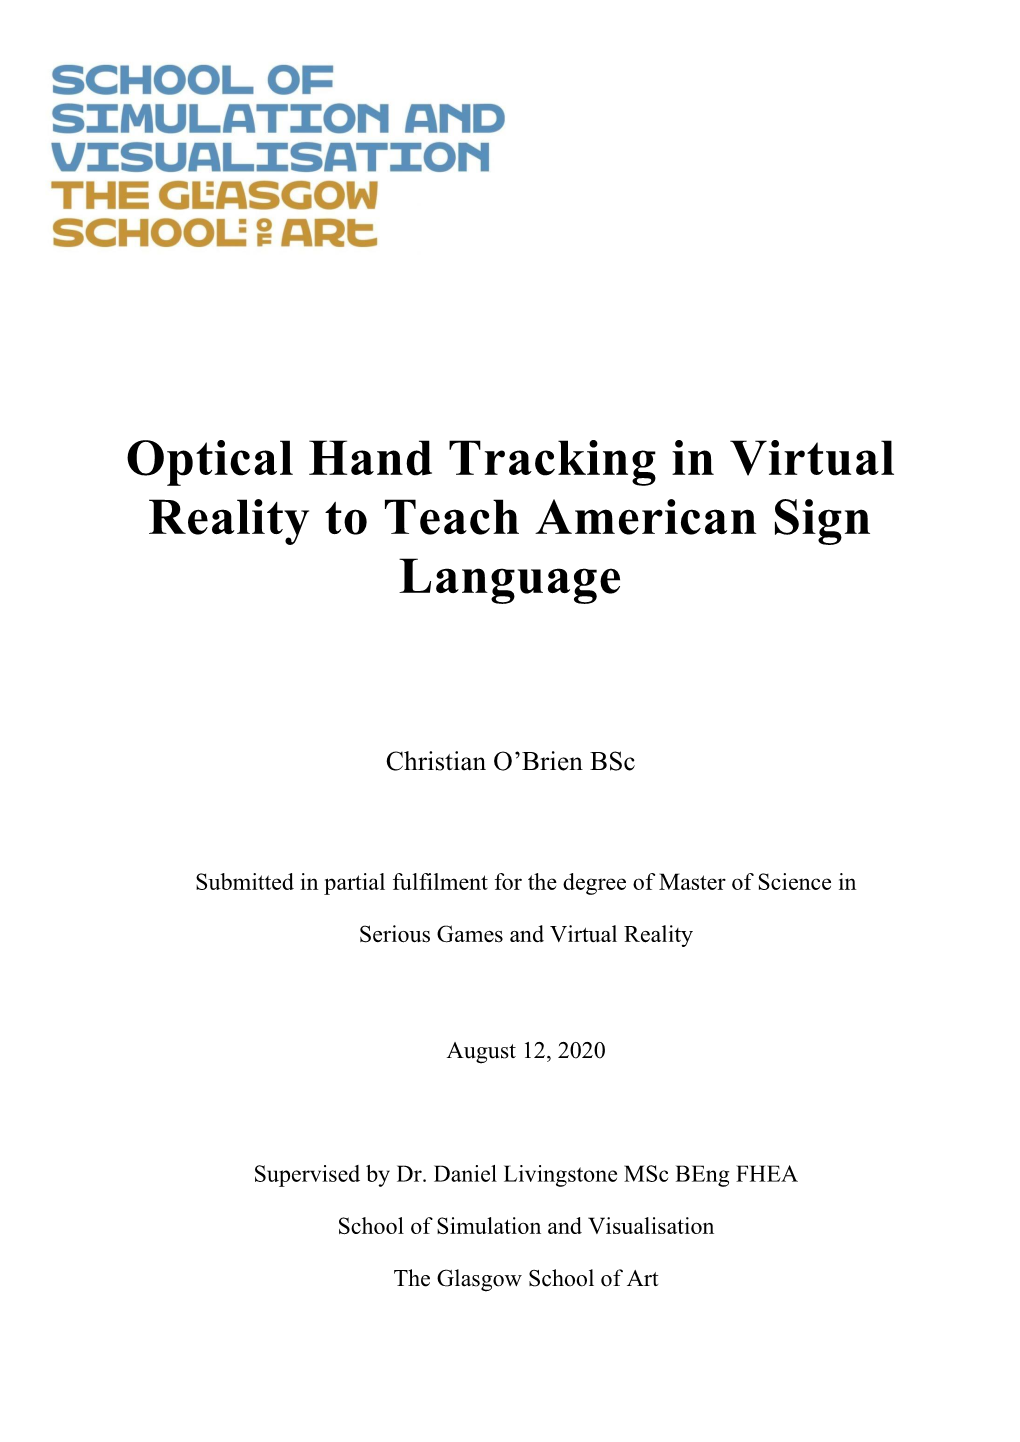 Evaluating the Use of Optical Hand Tracking in Virtual Reality to Teach